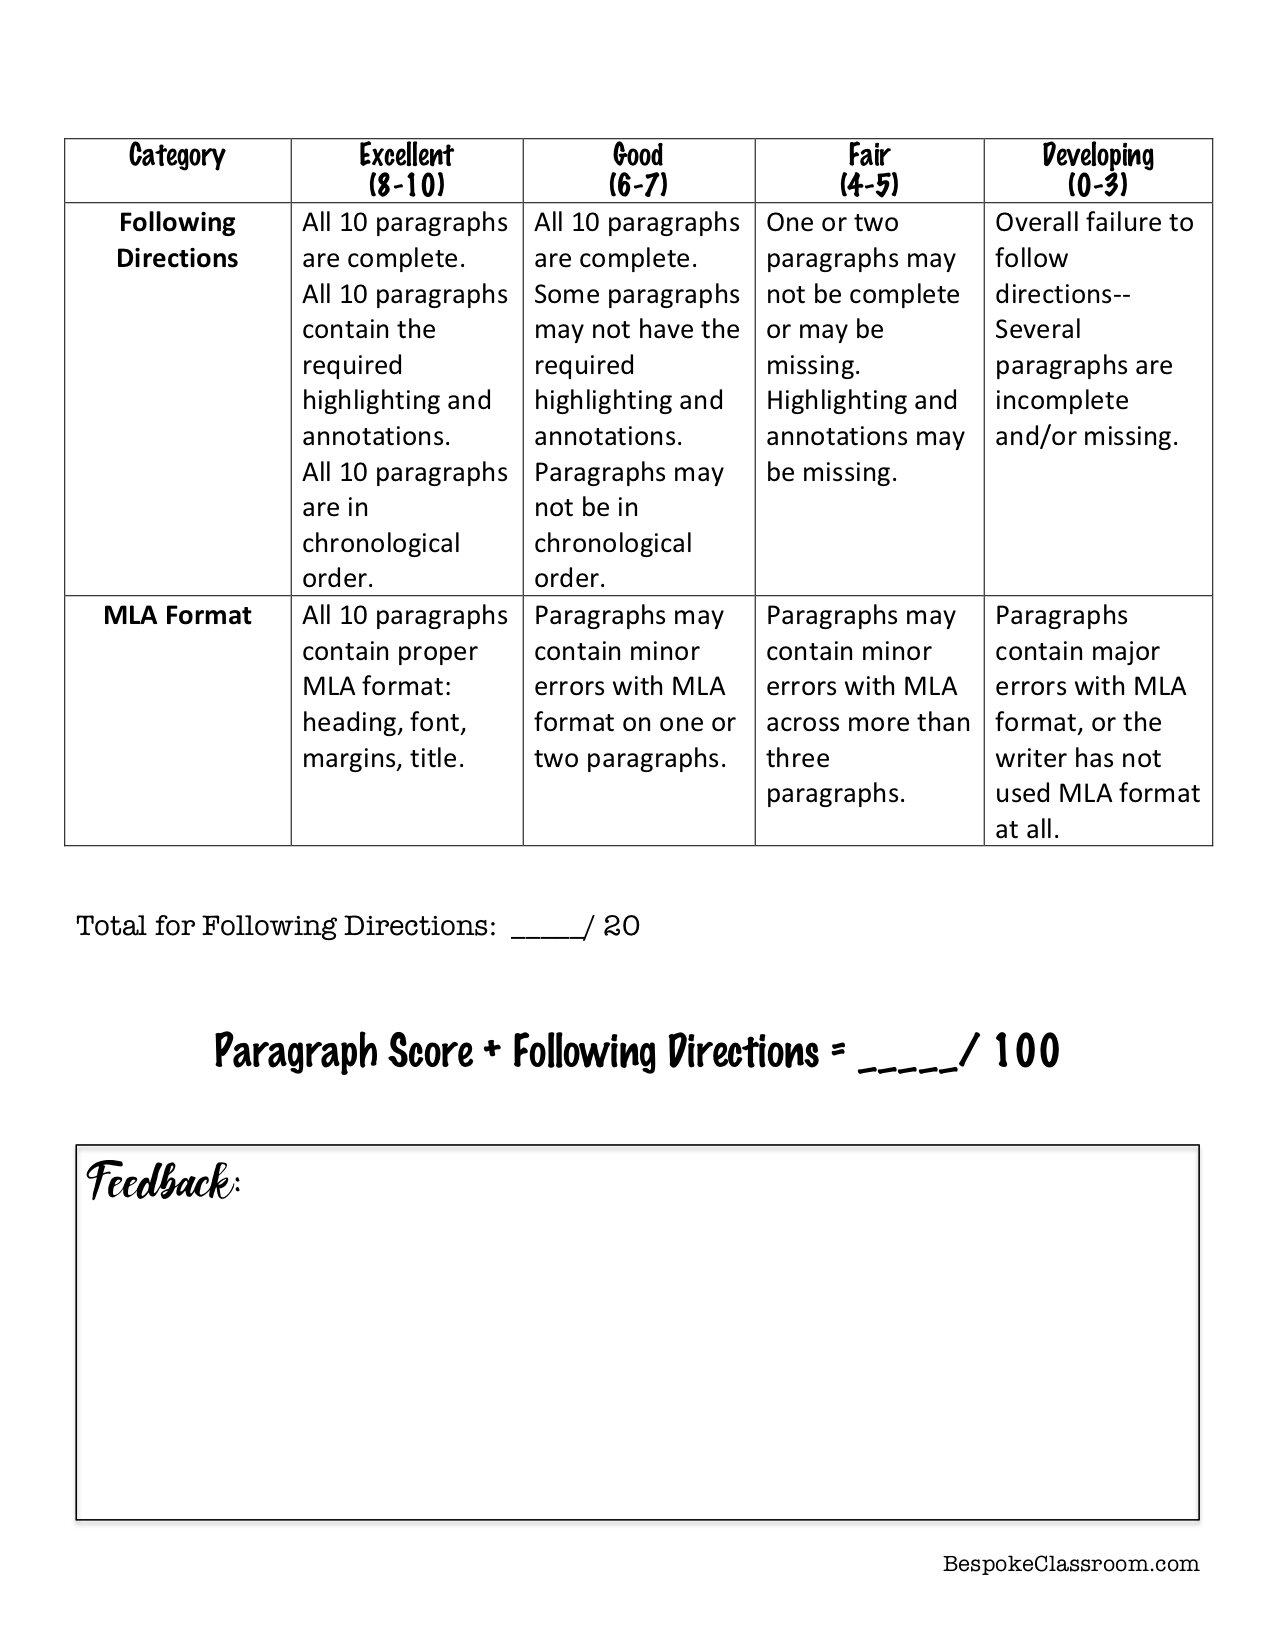 Paragraph+Portfolio+Project,+Rubric,+and+Metacognition+by+Bespoke+ELA3.jpg